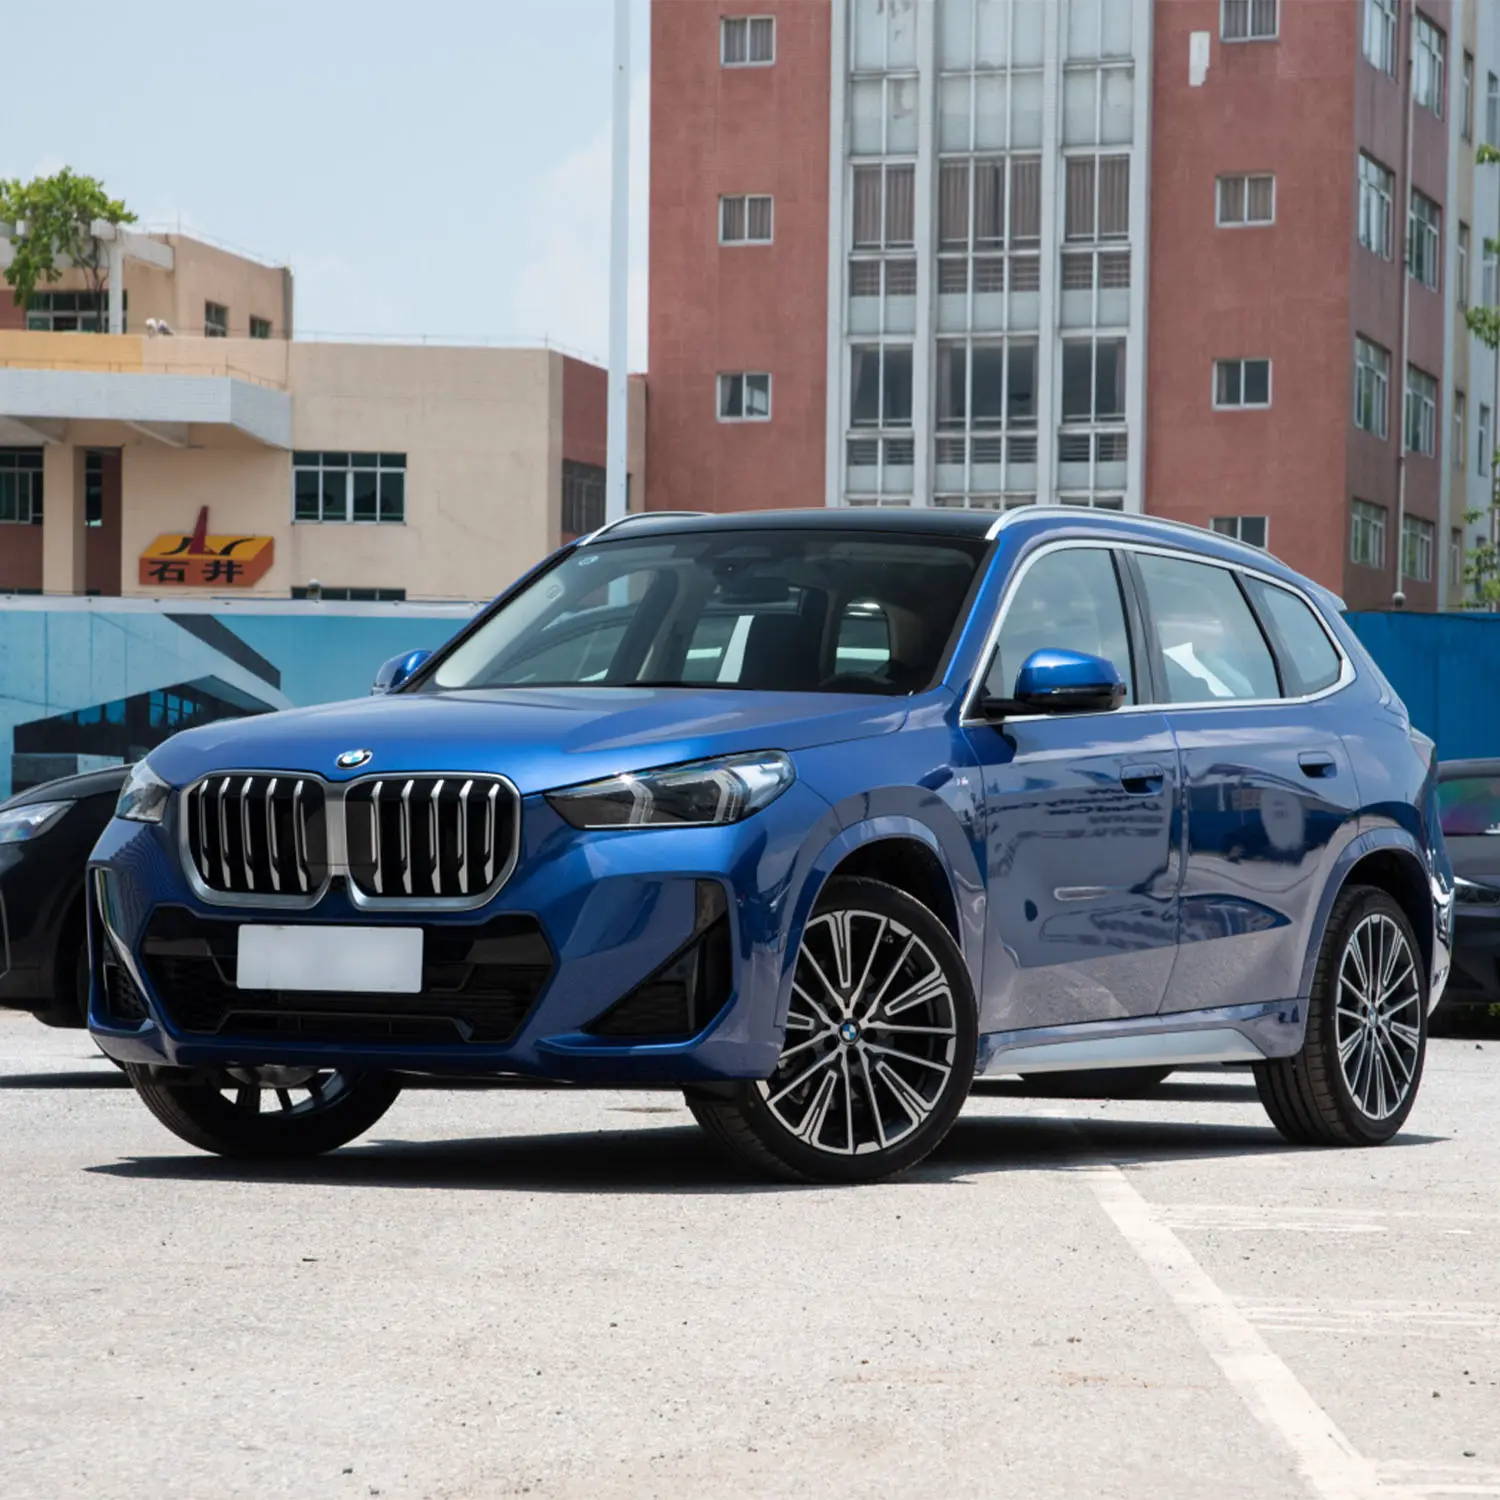 Automobile Germany Bmw X1 150kw Fwd Max Speed 229km/h Displacement 1.5l Sports Cars Petrol Compact Suv Car